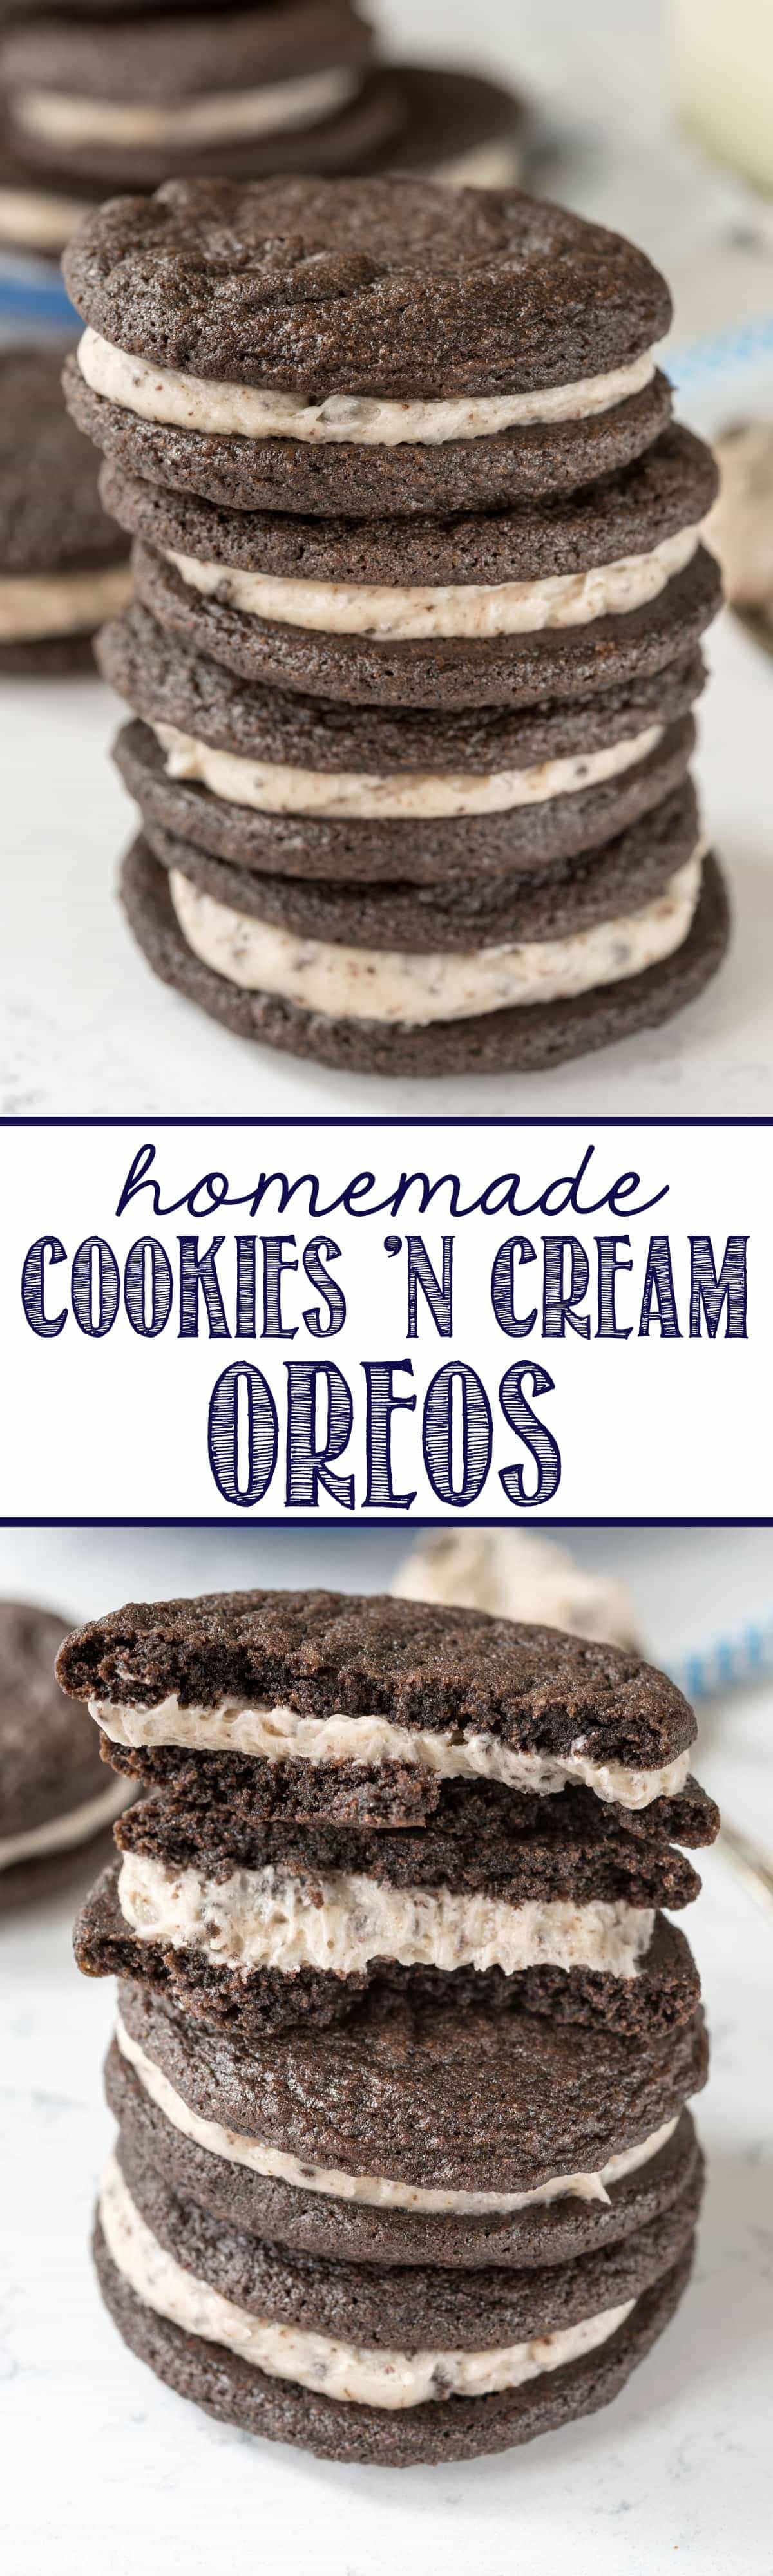 Homemade Cookies 'n Cream Oreos - this easy recipe is completely from scratch! Make soft homemade Oreos and fill them with a cookies 'n cream filling!